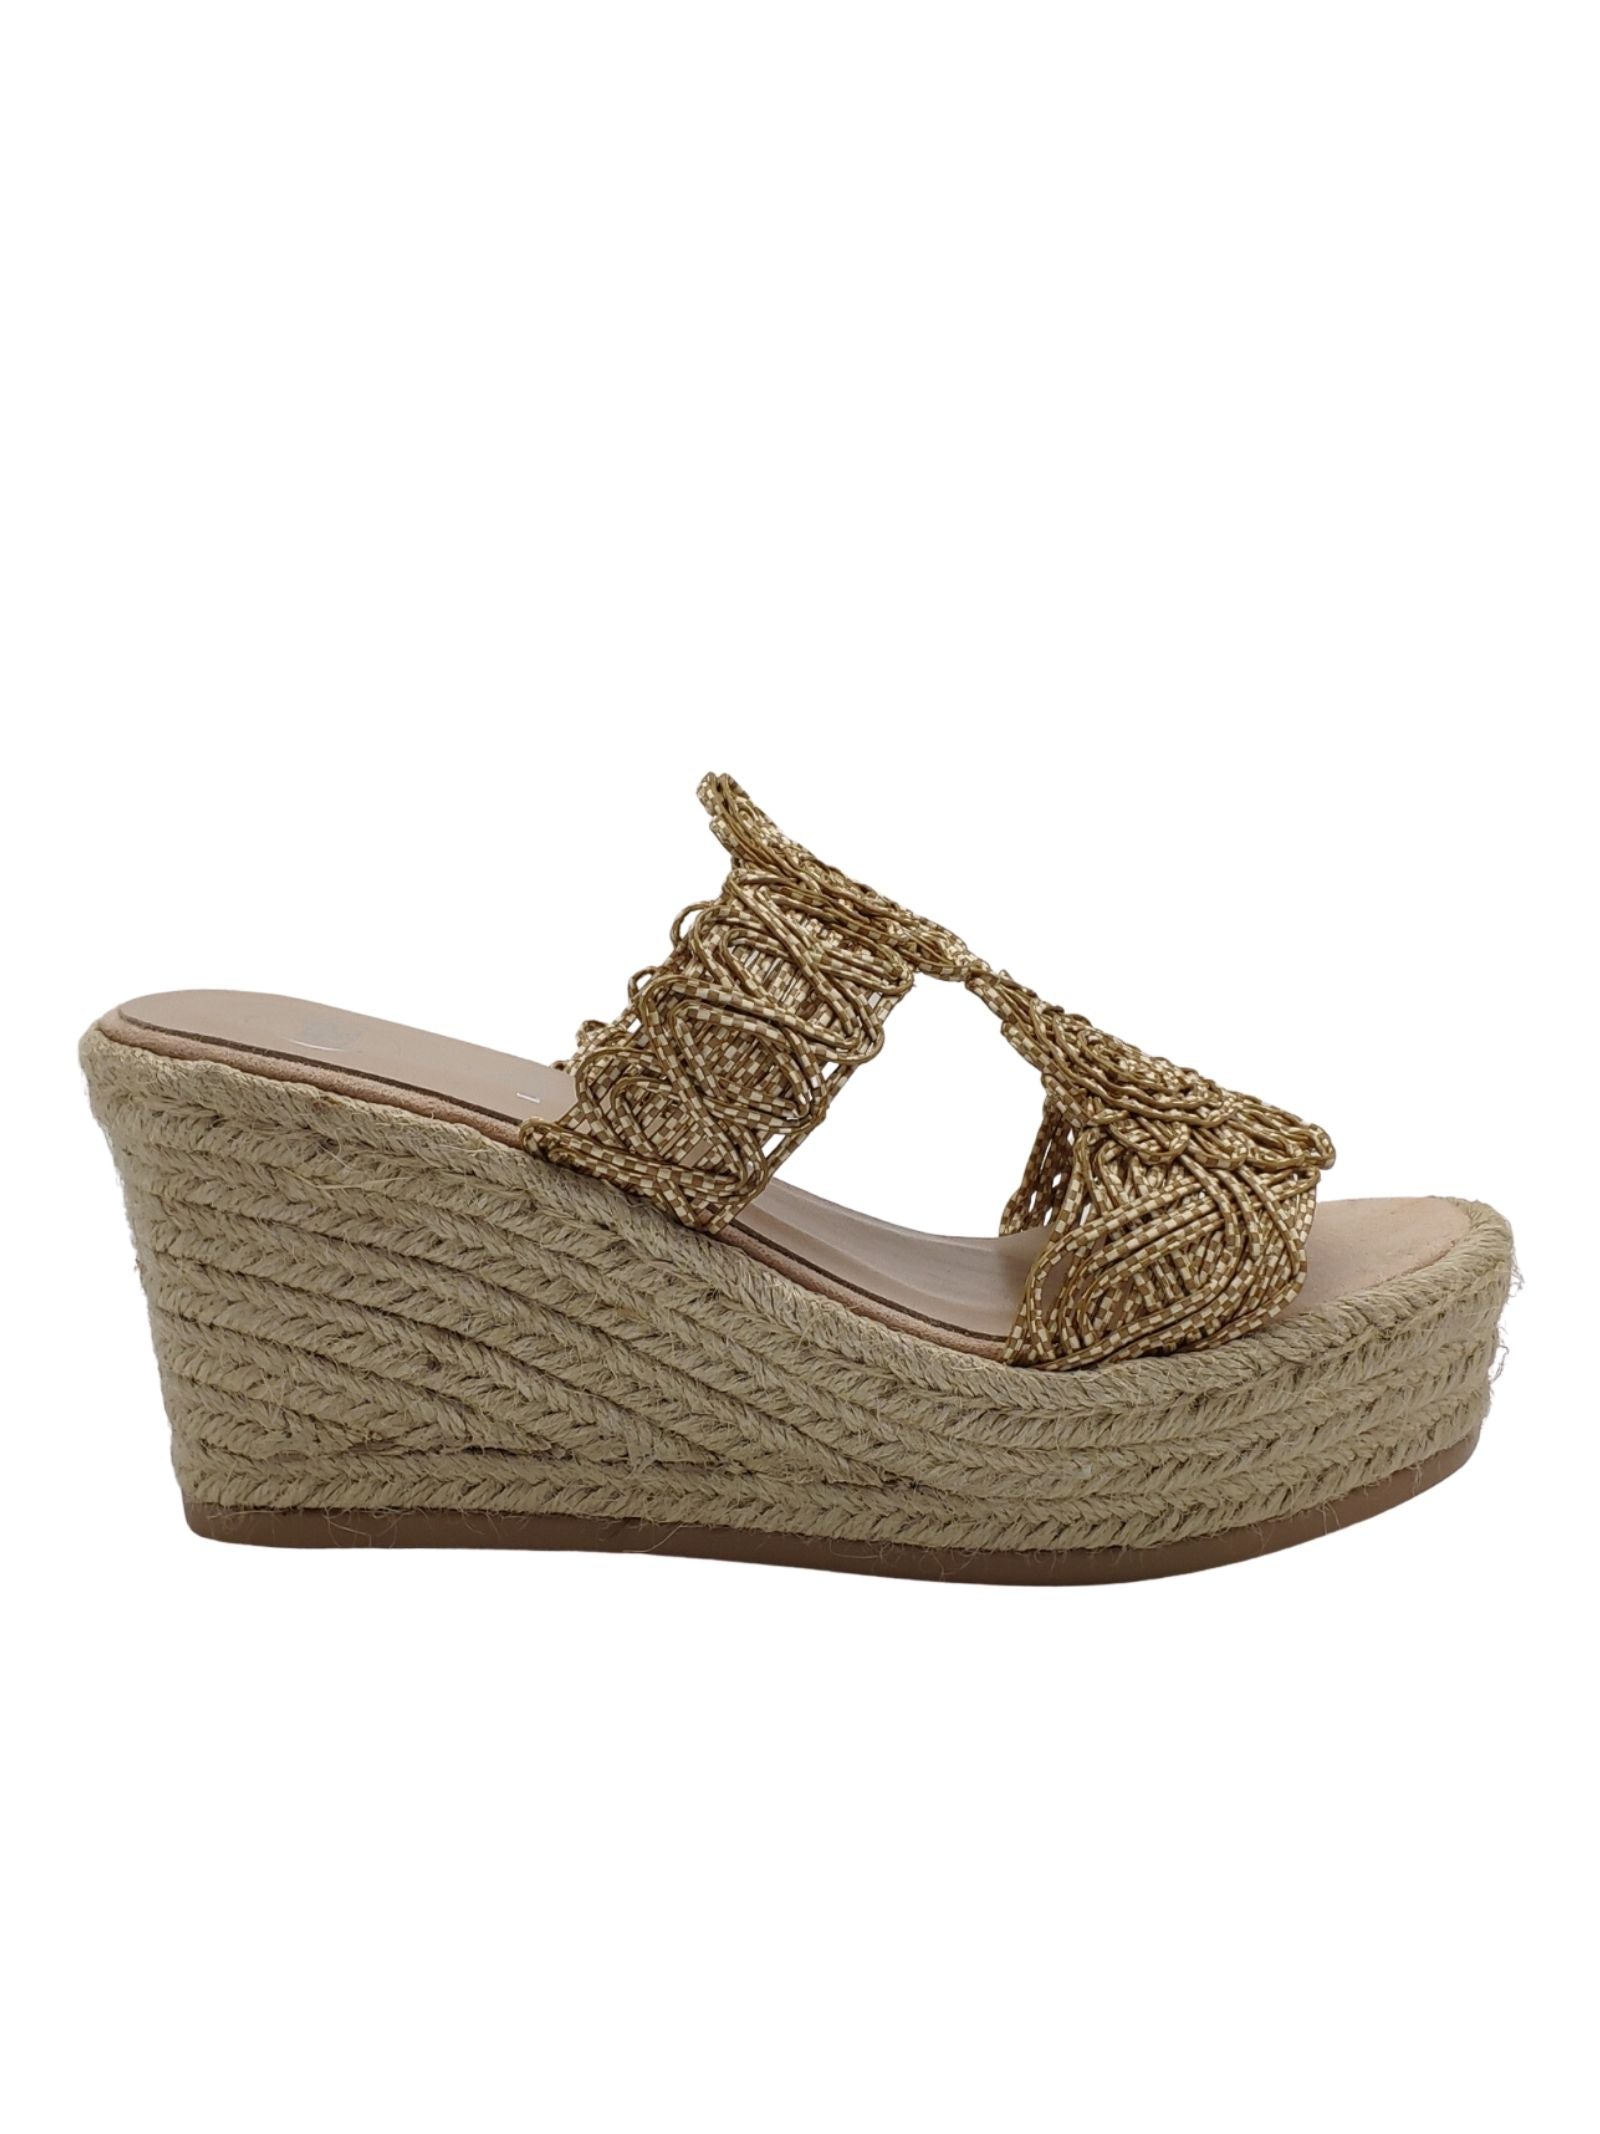 Women's Footwear Sandals in Beige Fabric with High Rope Wedge